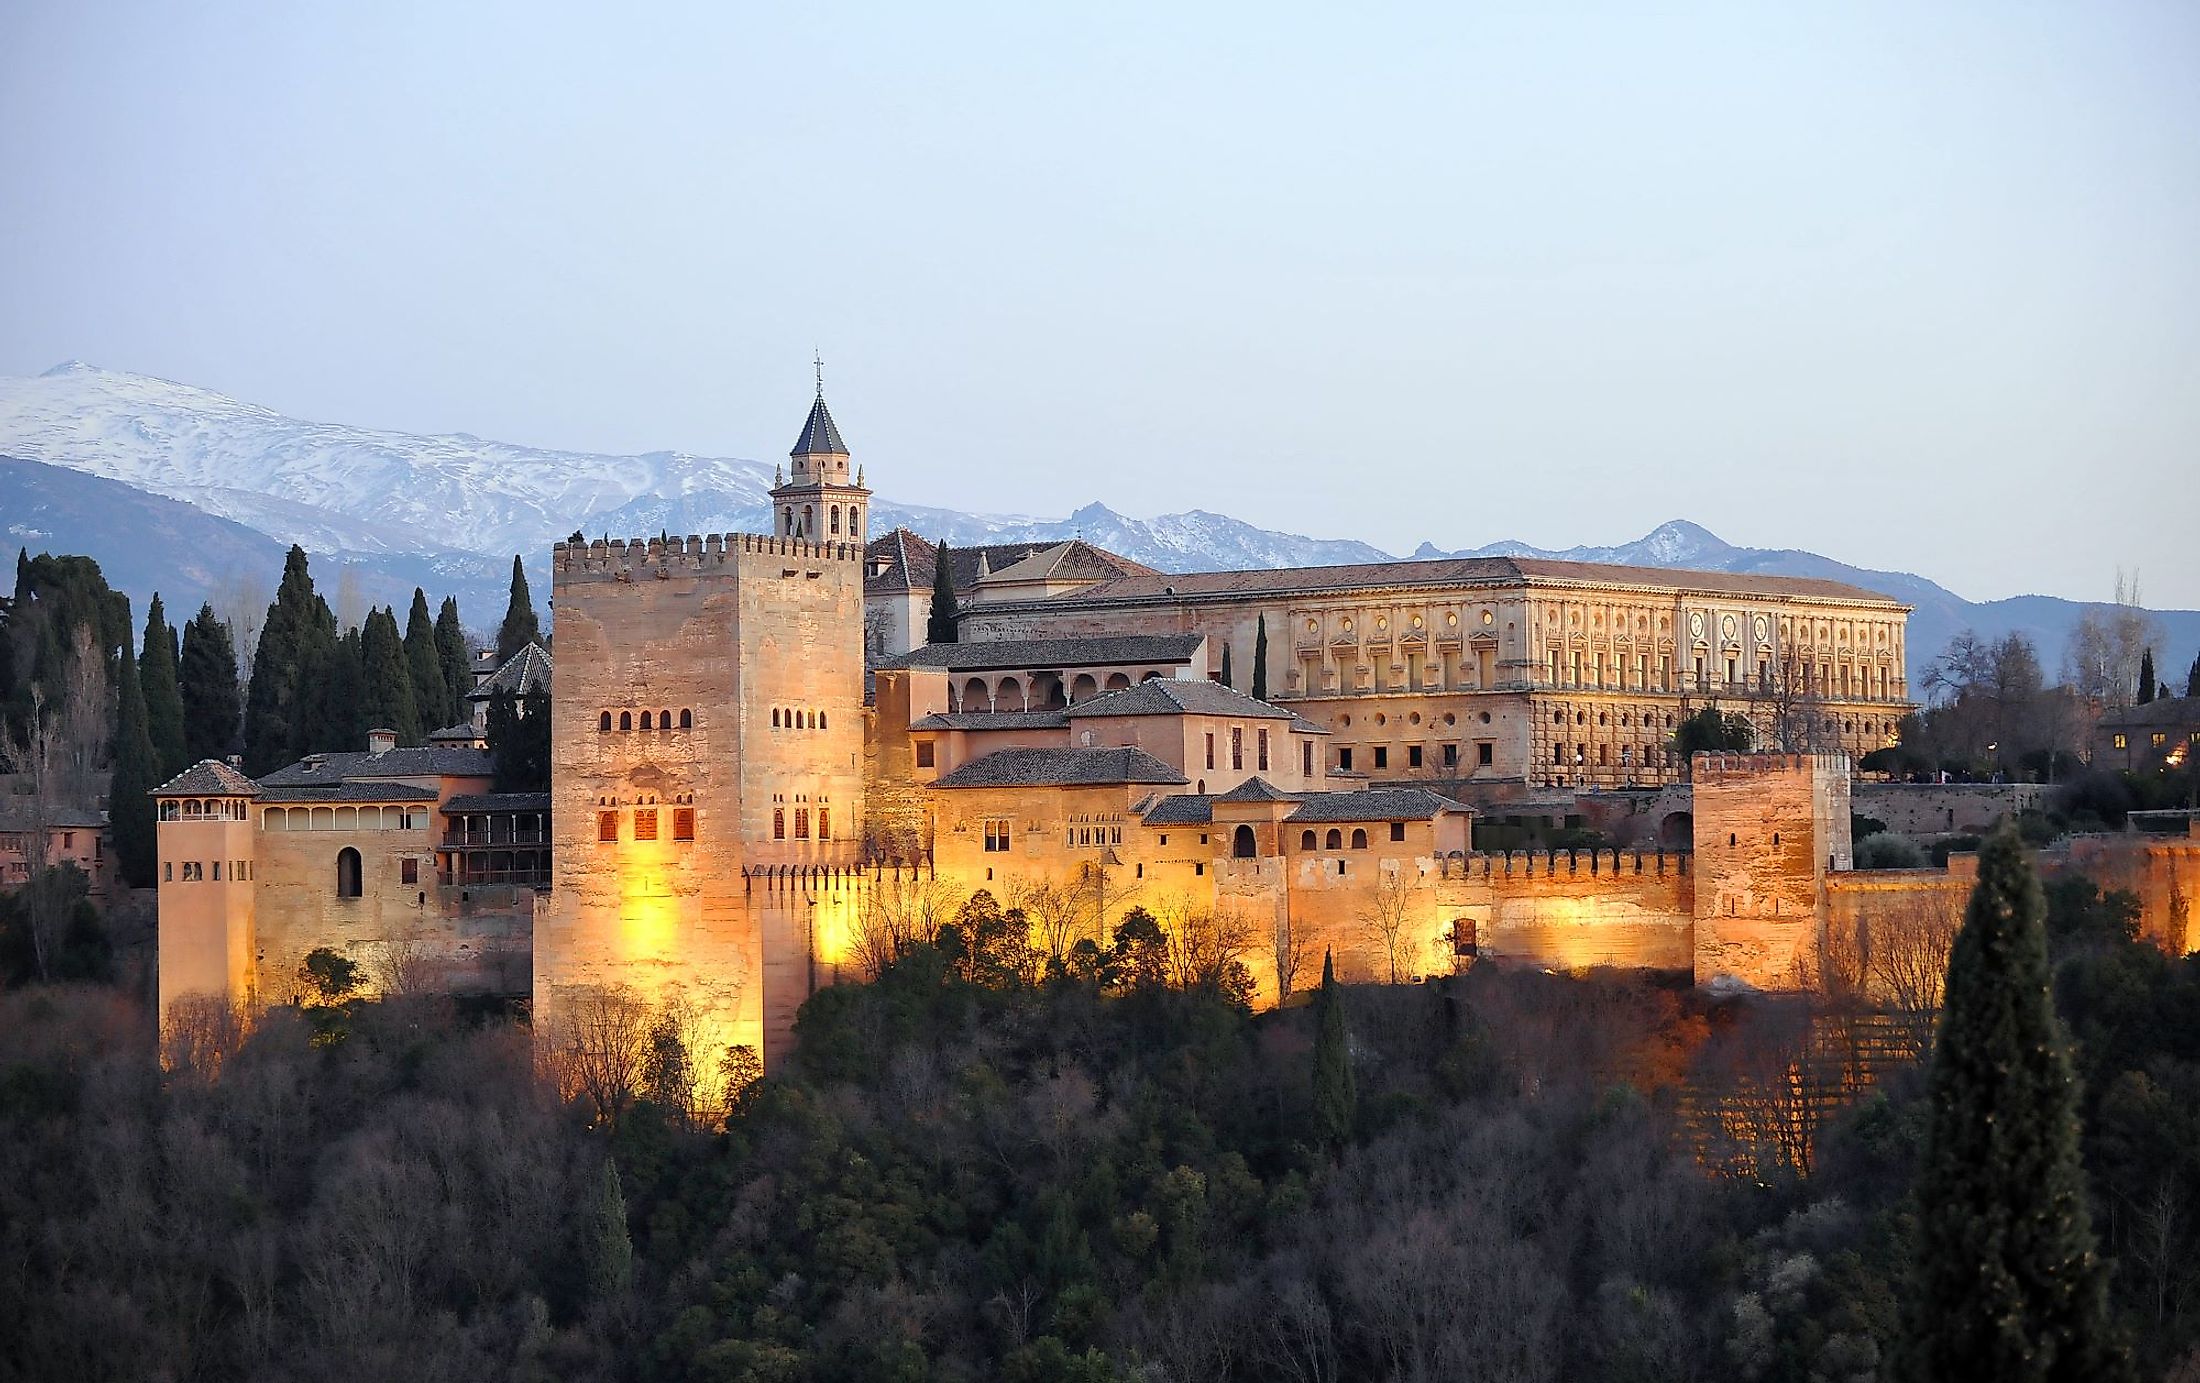 The Palace of Alhambra with Comares Tower, Palace of Charles V and Sierra Nevada at the background during sunset in Granada, Andalusia, Spain. 